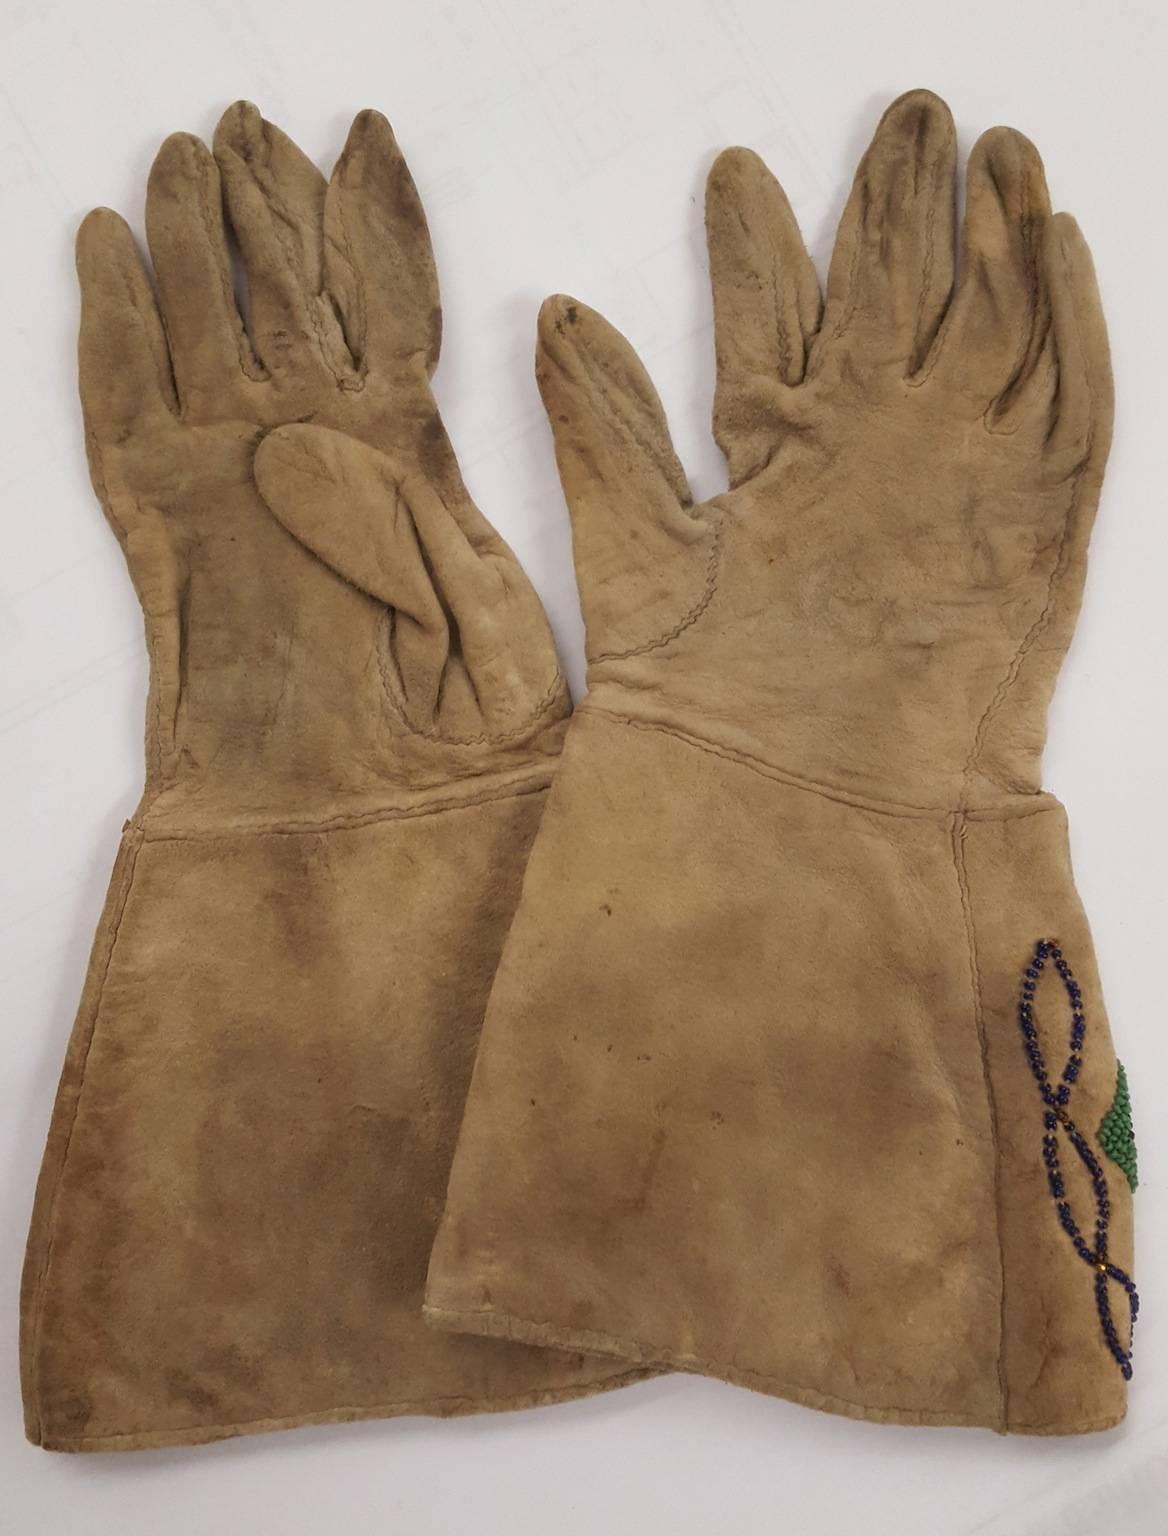 A pair of (circa 1890-1910) Native American Plains gloves, possibly for a woman. Made of deer skin with glass bead designs on the cuffs and top side of gloves.